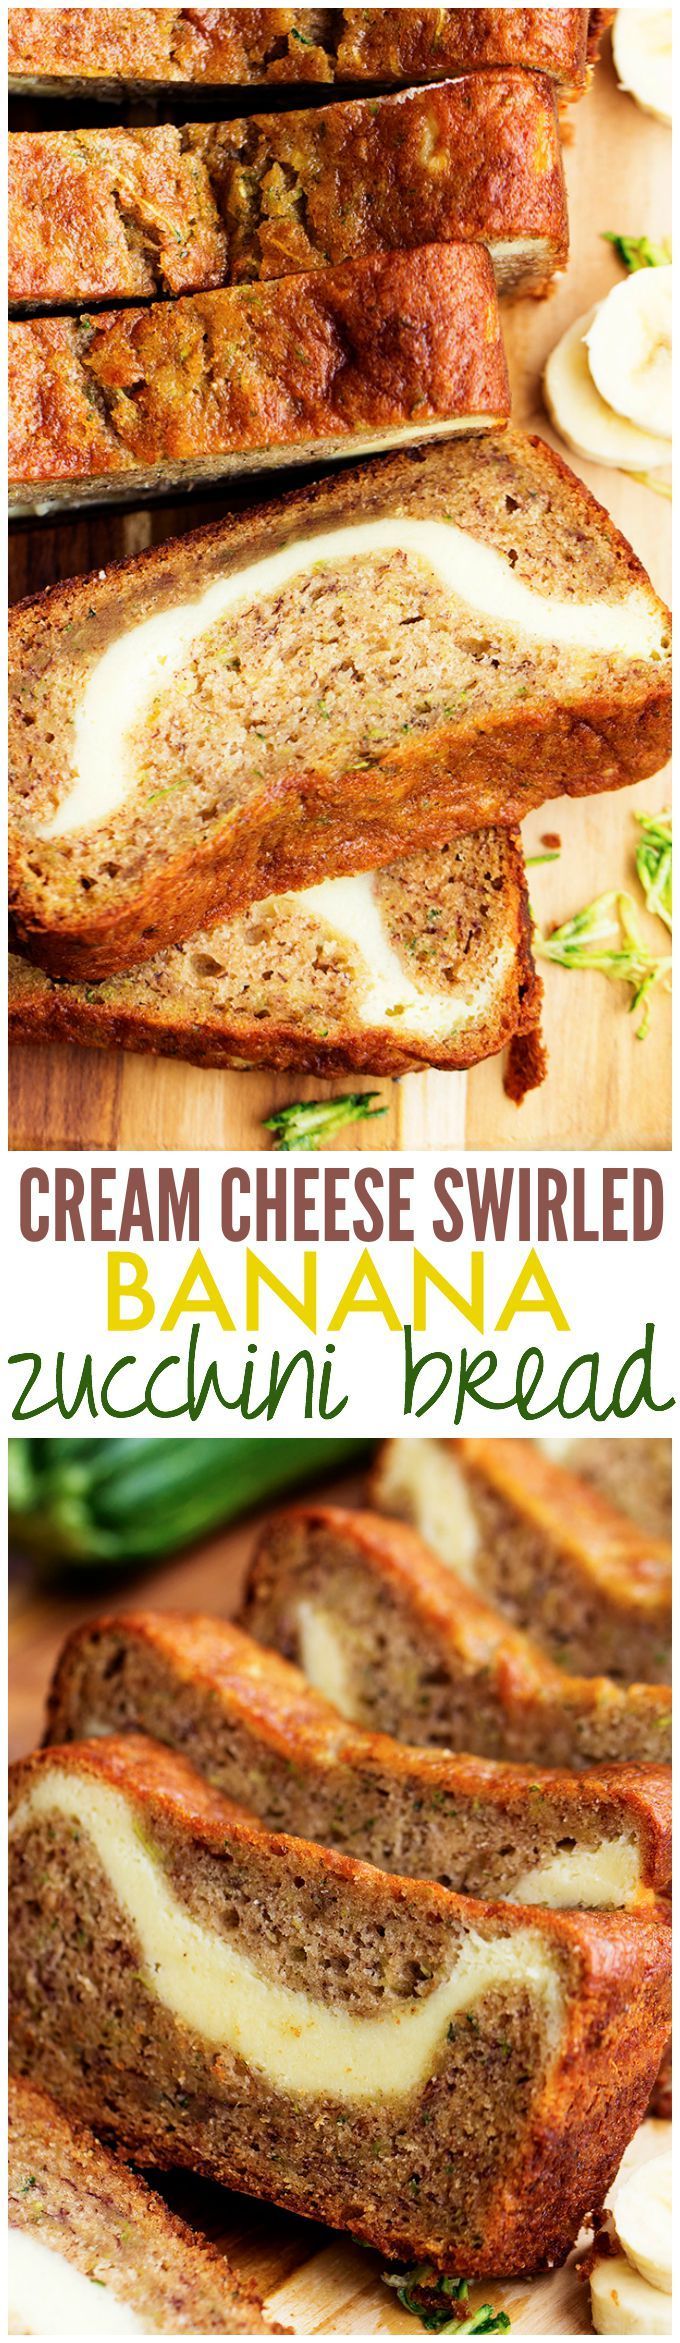 This Cream Cheese Swirled Banana Zucchini Bread is one of the BEST breads you will make!